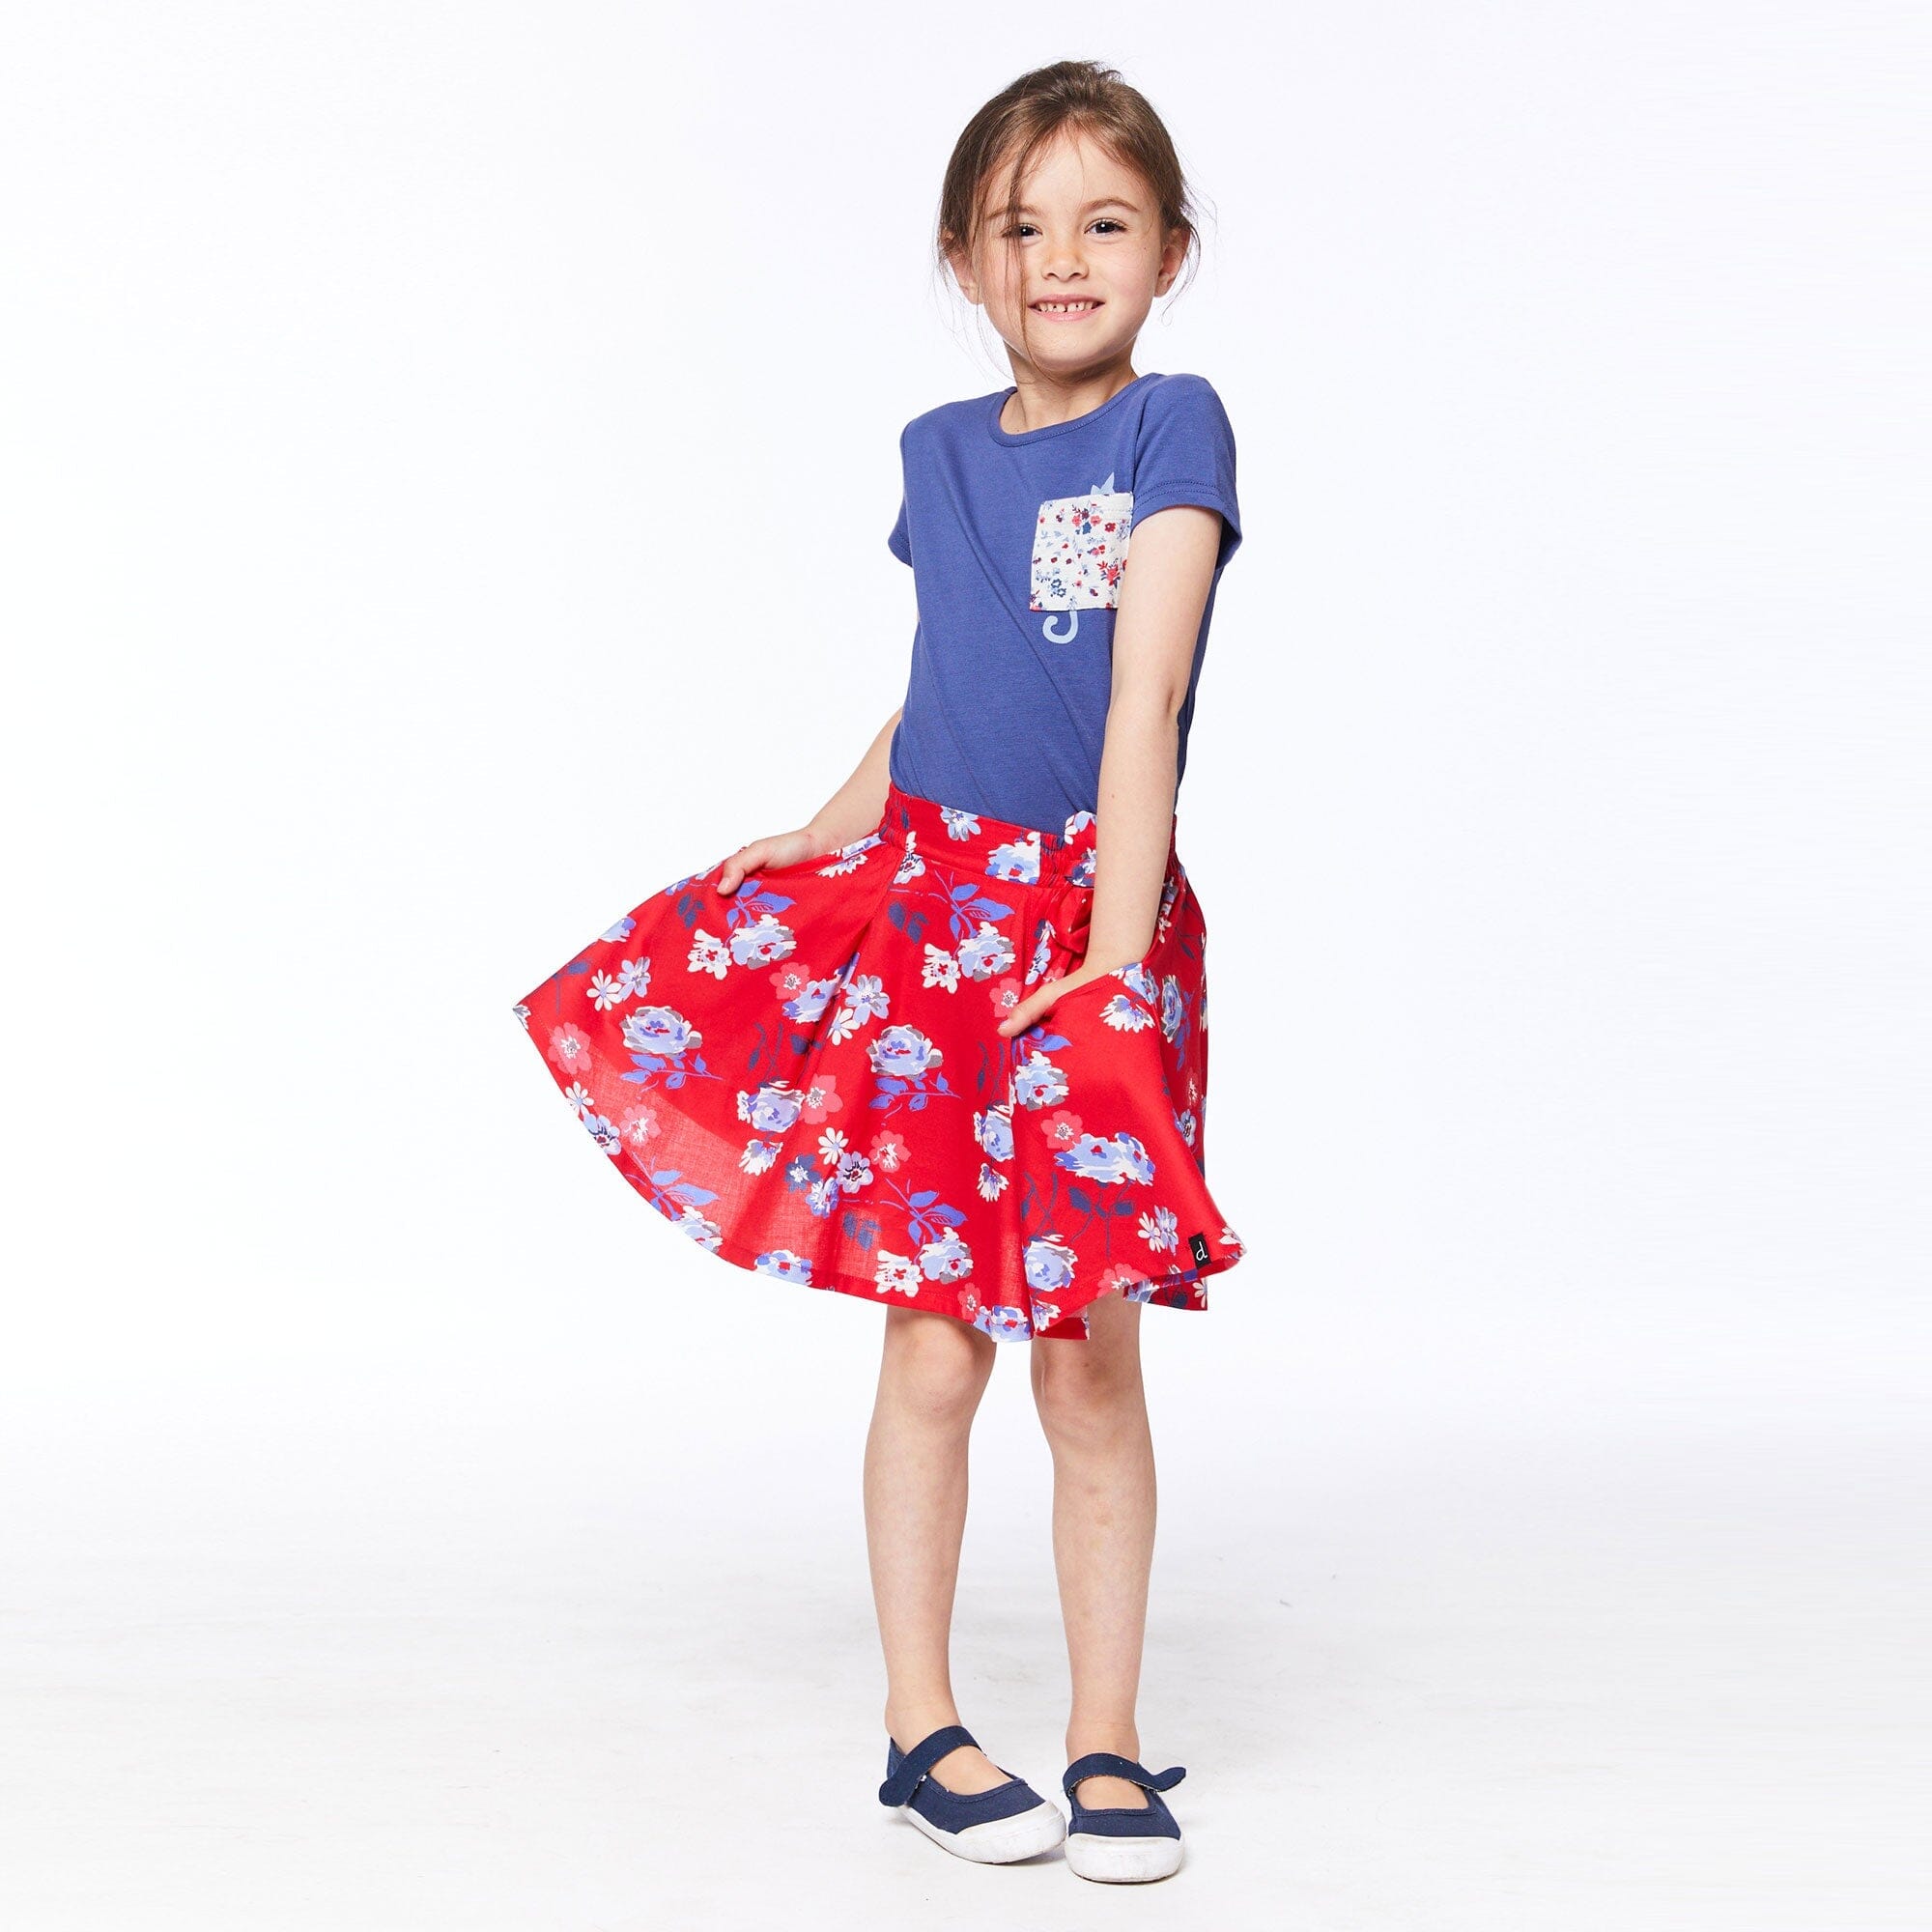 Printed Skort With Bow Red Flowers - E30G80_051